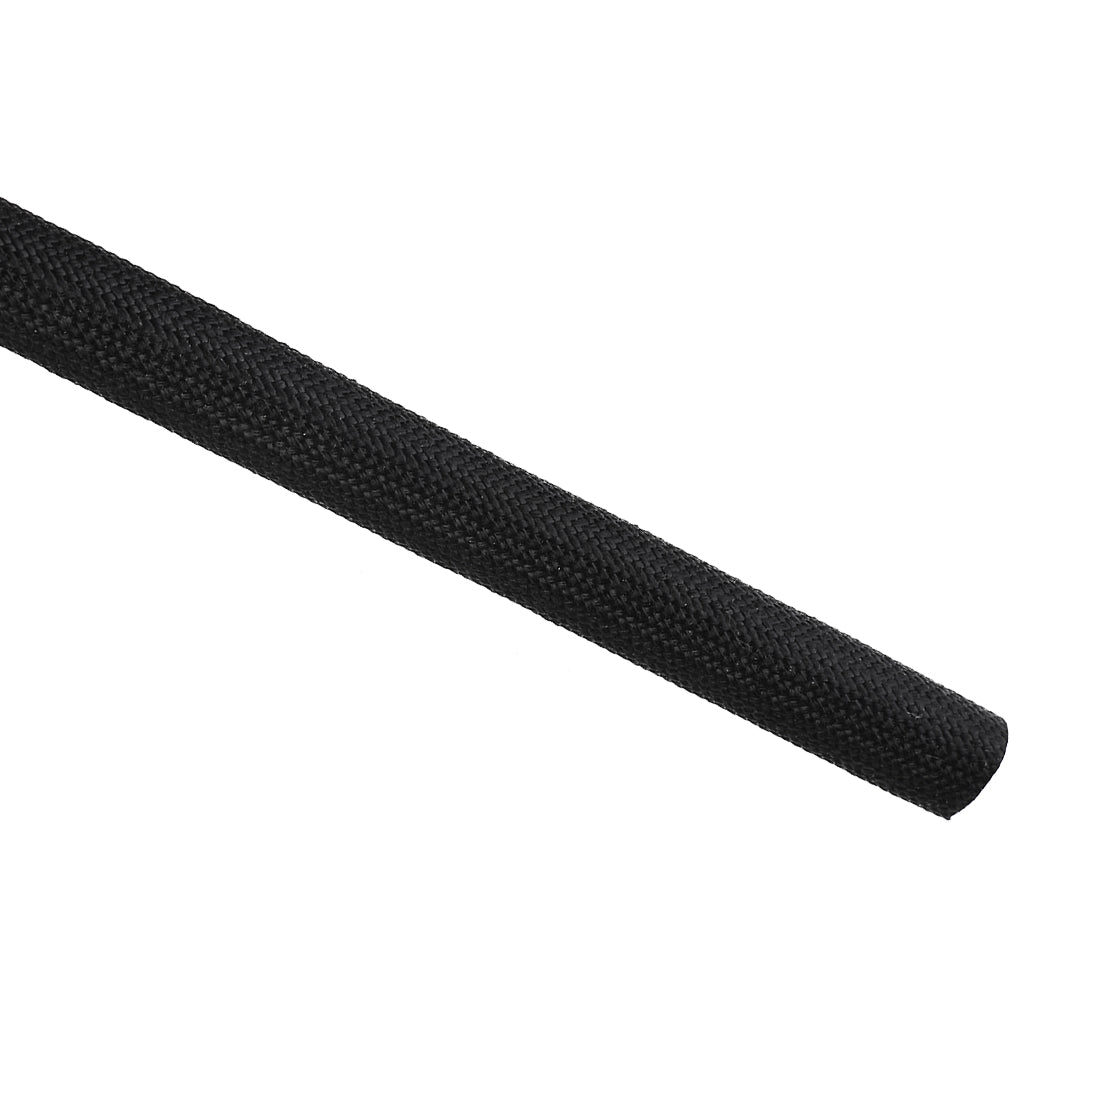 uxcell Uxcell Insulation Cable Protector, 33Ft-9mm High TEMP Silicone Fiberglass Sleeve Black